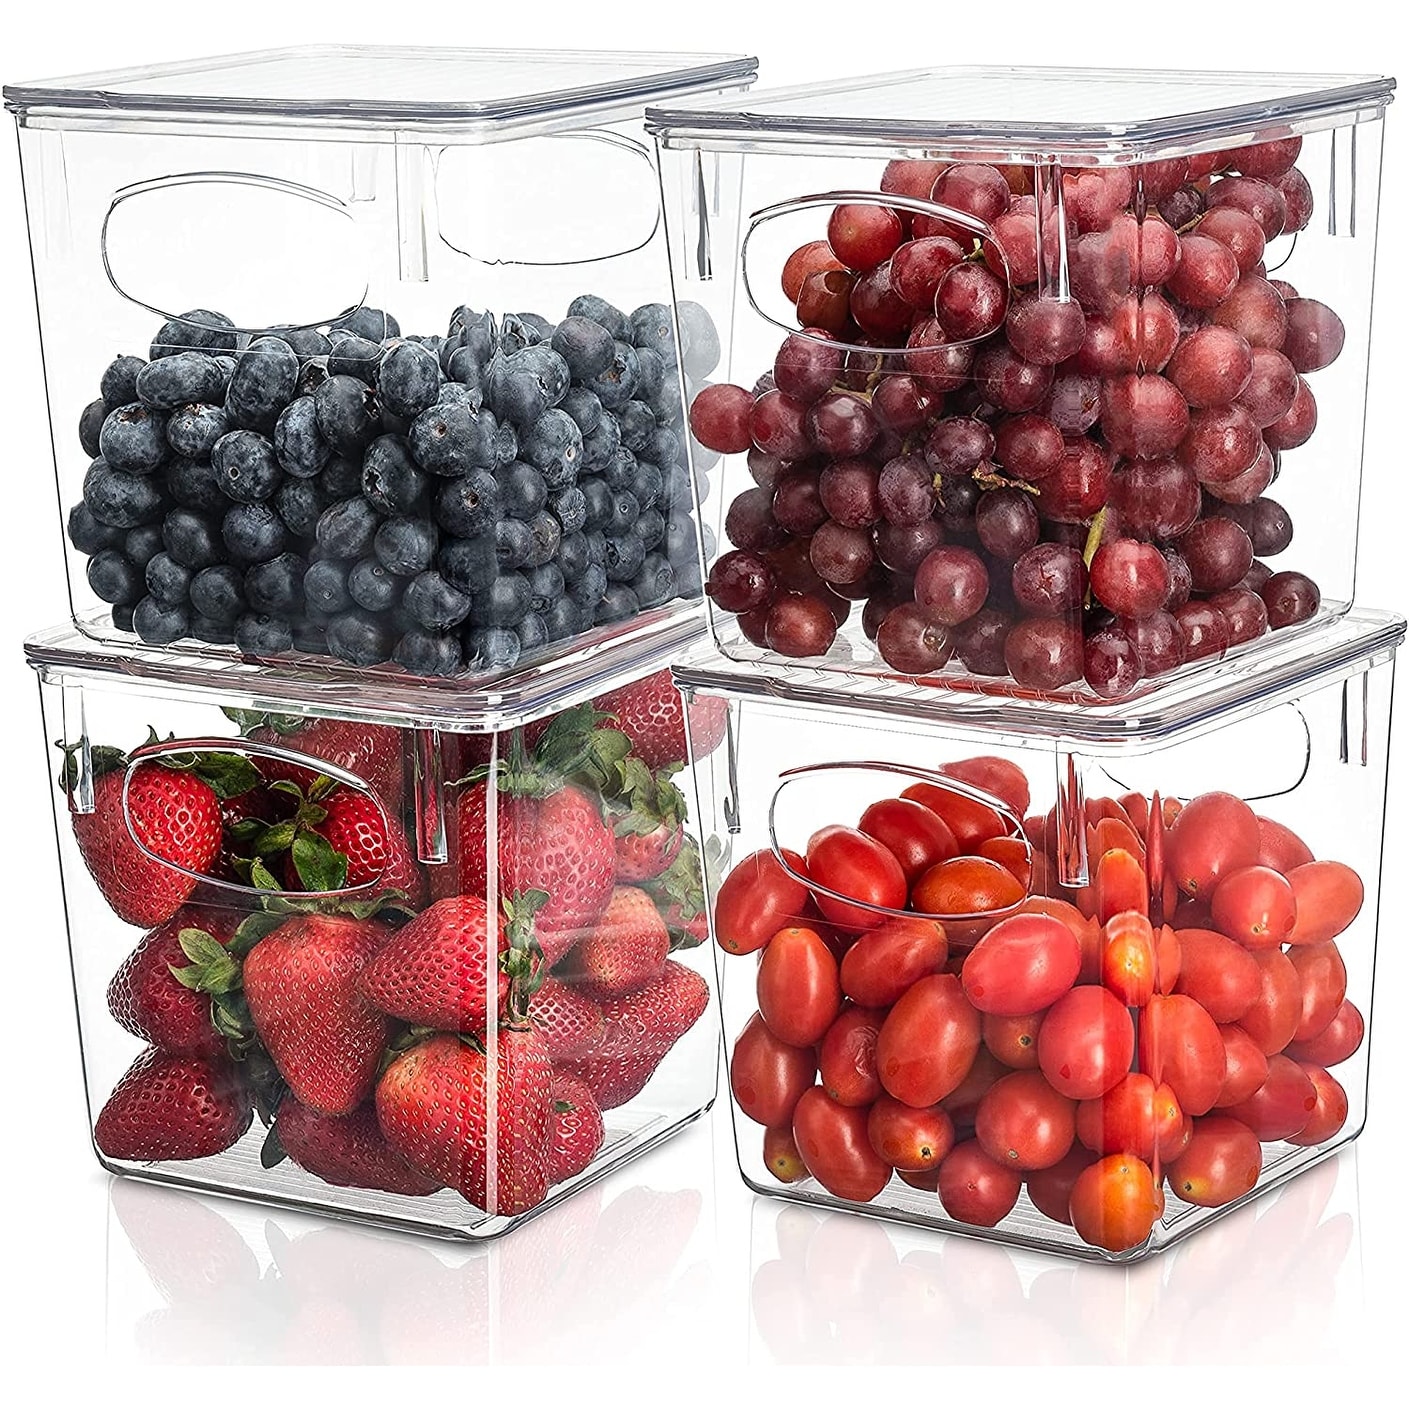 https://ak1.ostkcdn.com/images/products/is/images/direct/b266f810111c6e7f8415cc73d0df694b0d876647/Sorbus-Clear-Plastic-Organizer-Storage-Bin-Containers-with-Handle-and-Lid-for-Pantry-Food-%26-Kitchen-Fridge-%284-Pack%29.jpg